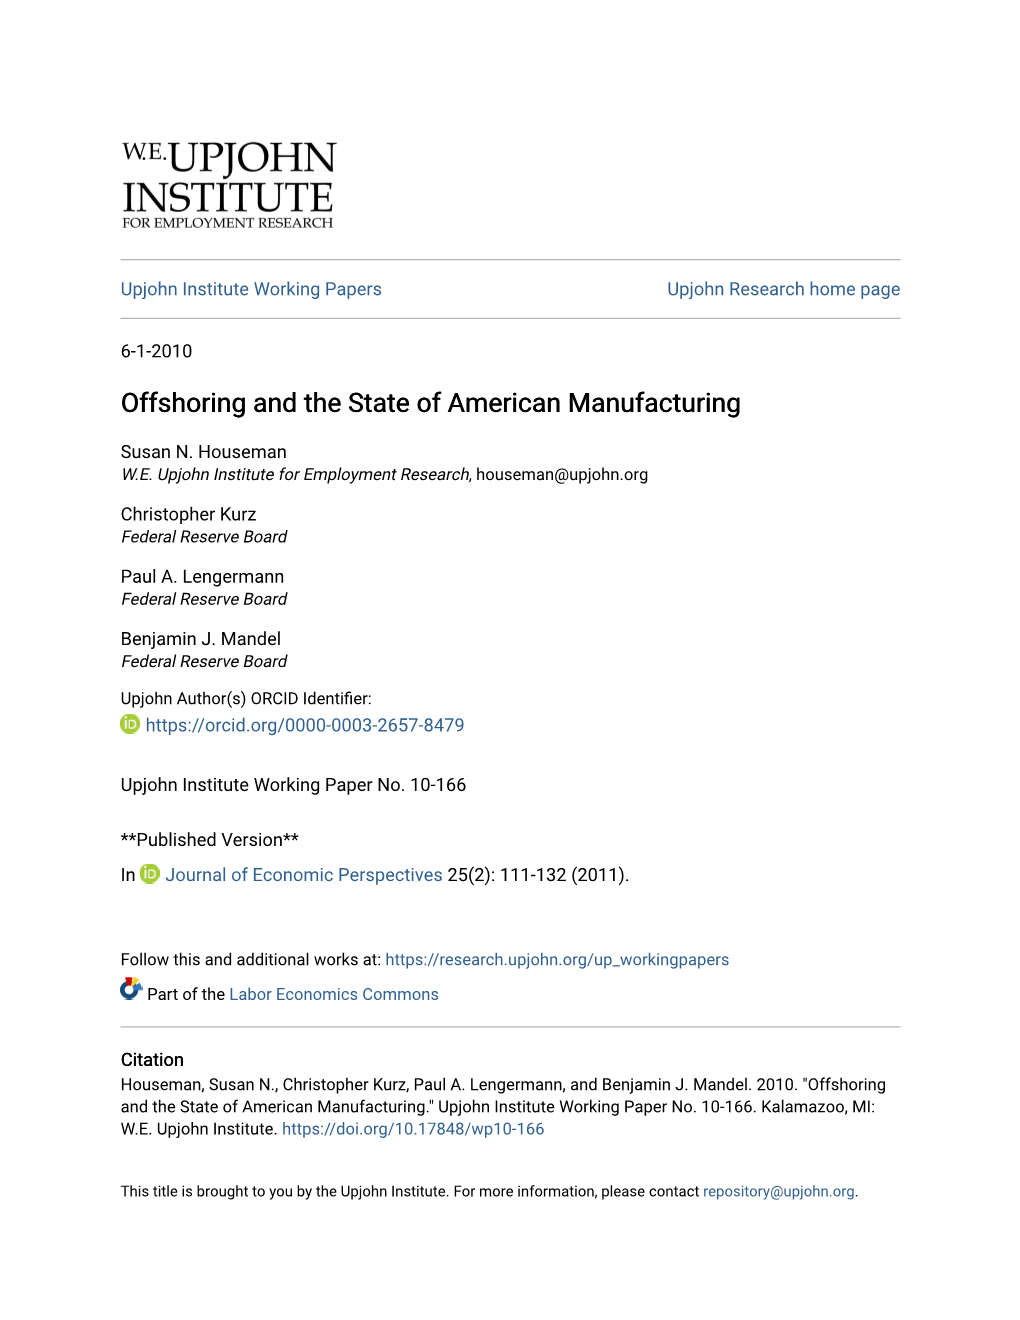 Offshoring and the State of American Manufacturing